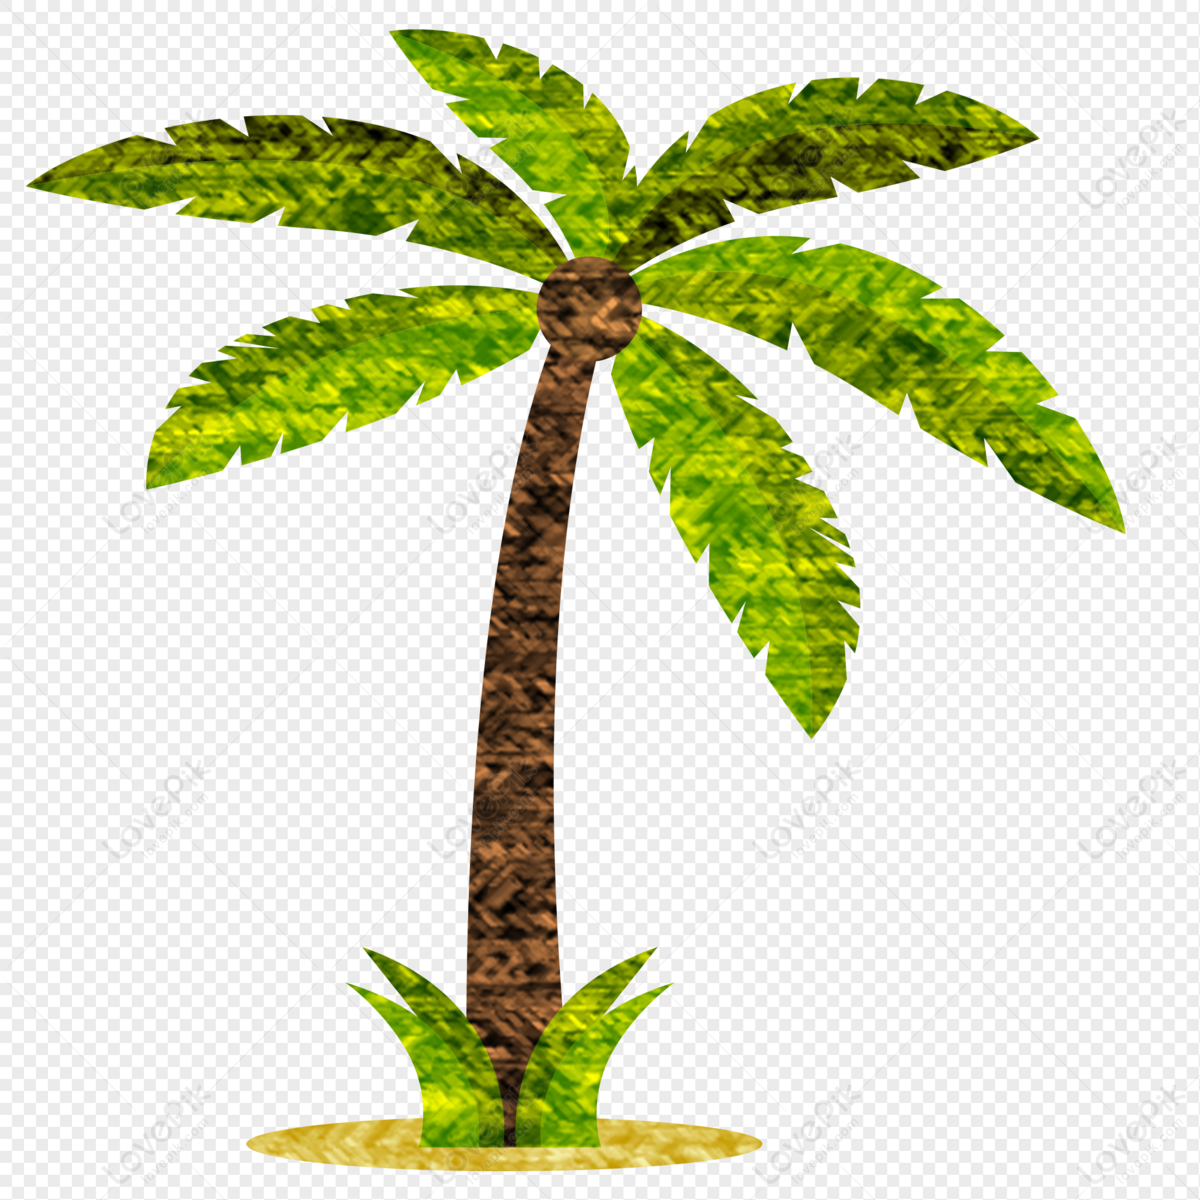 Creative Cartoon Coconut Tree Illustration PNG Image Free Download And  Clipart Image For Free Download - Lovepik | 401276961